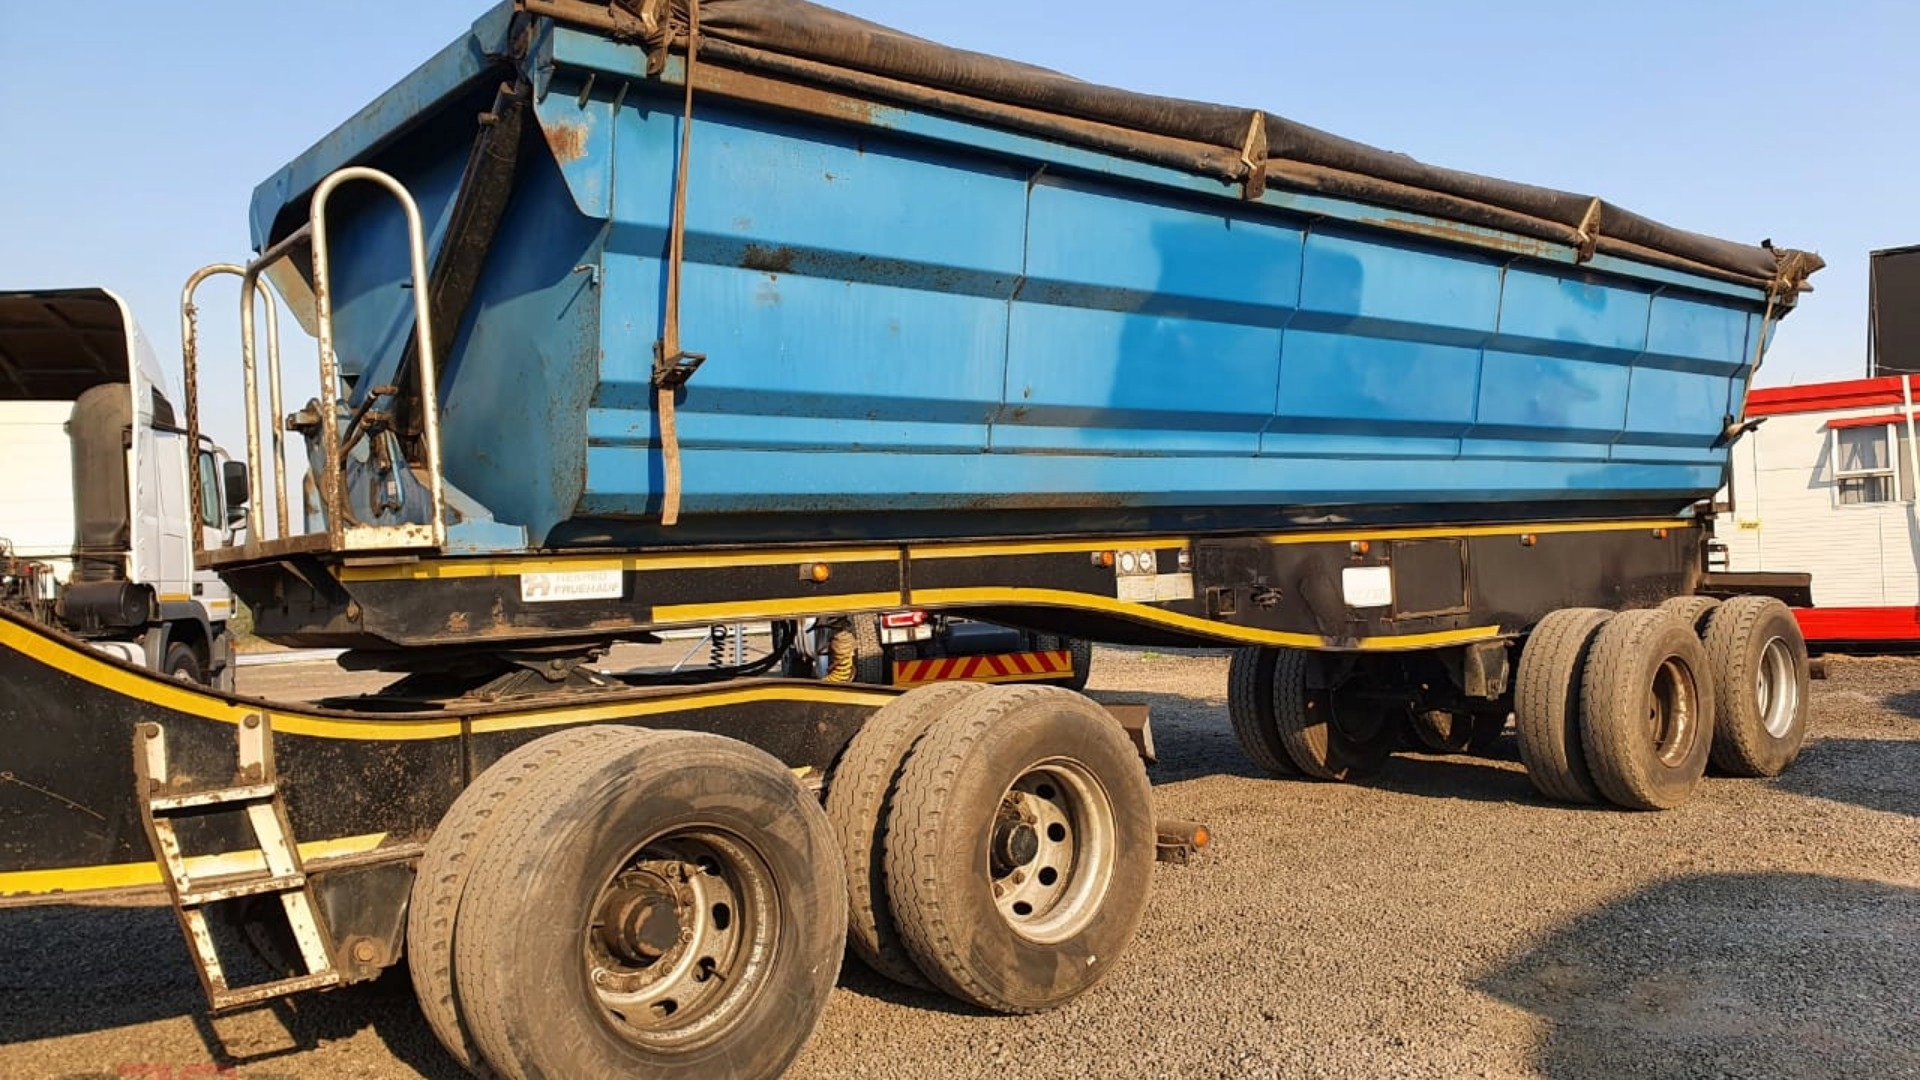 SA Truck Bodies Trailers Side tipper SA TRUCK BODIES 45 CUBE SIDE TIPPER 2015 for sale by ZA Trucks and Trailers Sales | Truck & Trailer Marketplaces